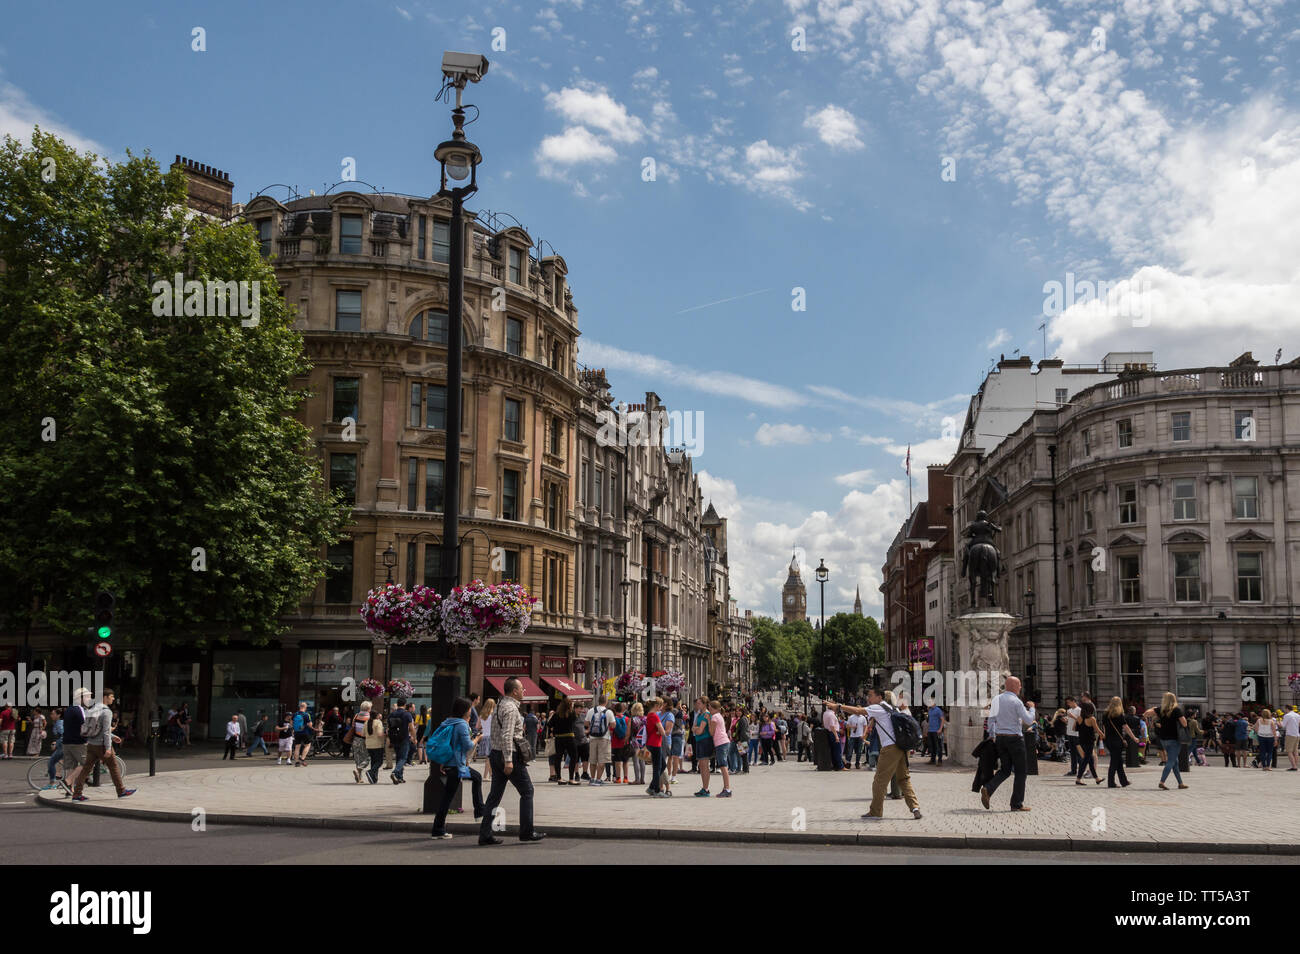 London - July 6th 2014: Big Ben view from Trafalgar square, crowded with tourists Stock Photo